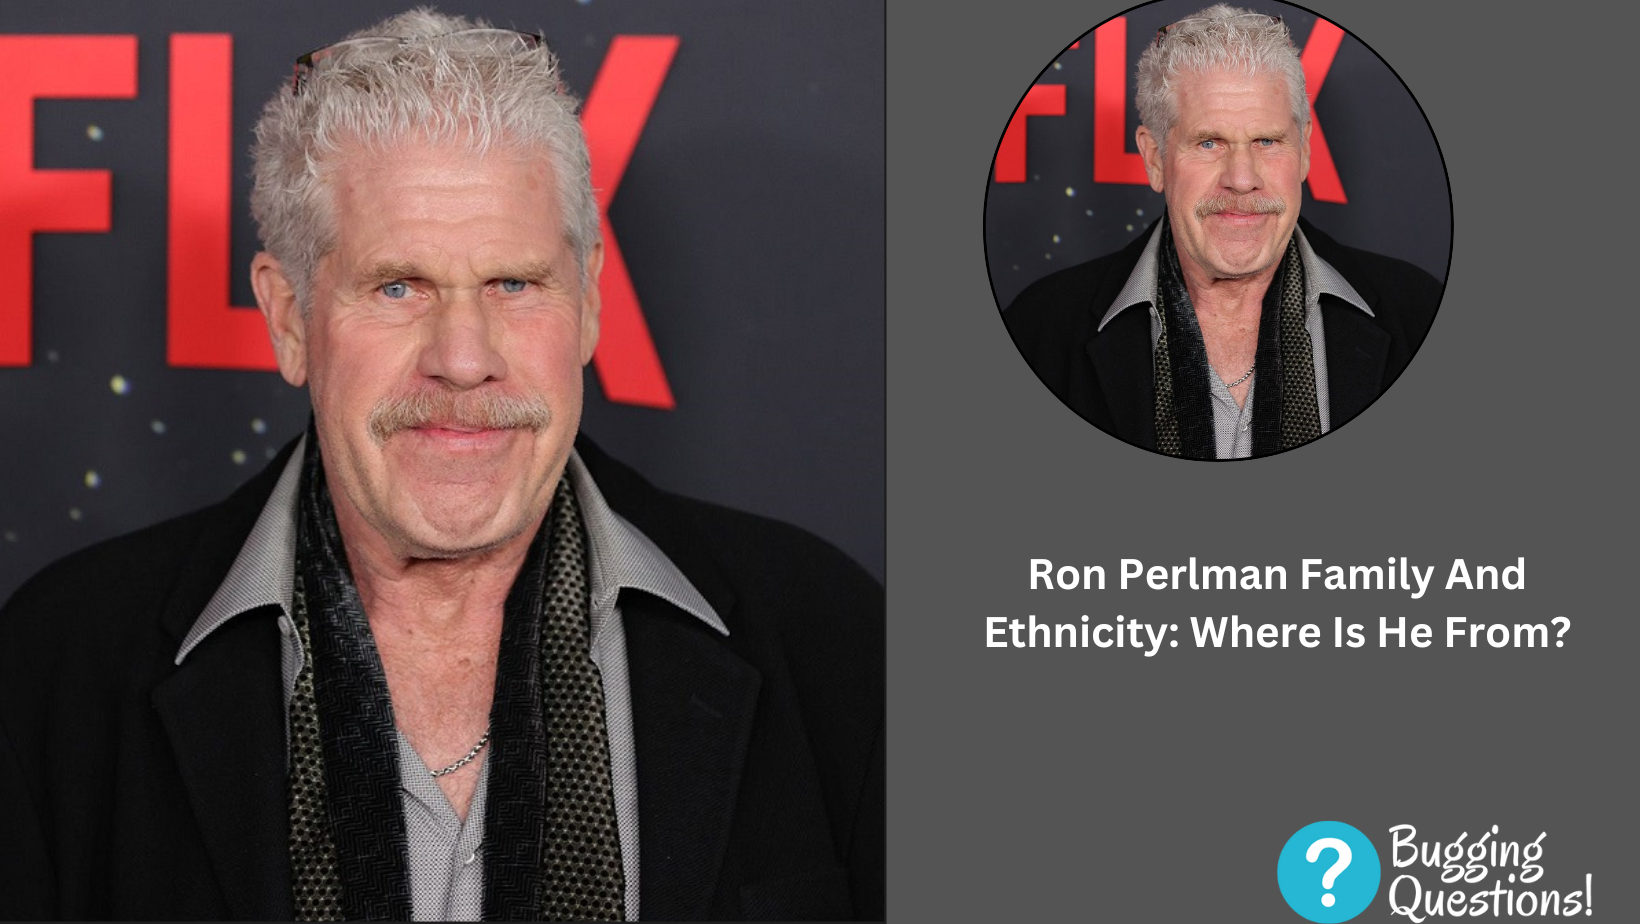 Ron Perlman Family And Ethnicity